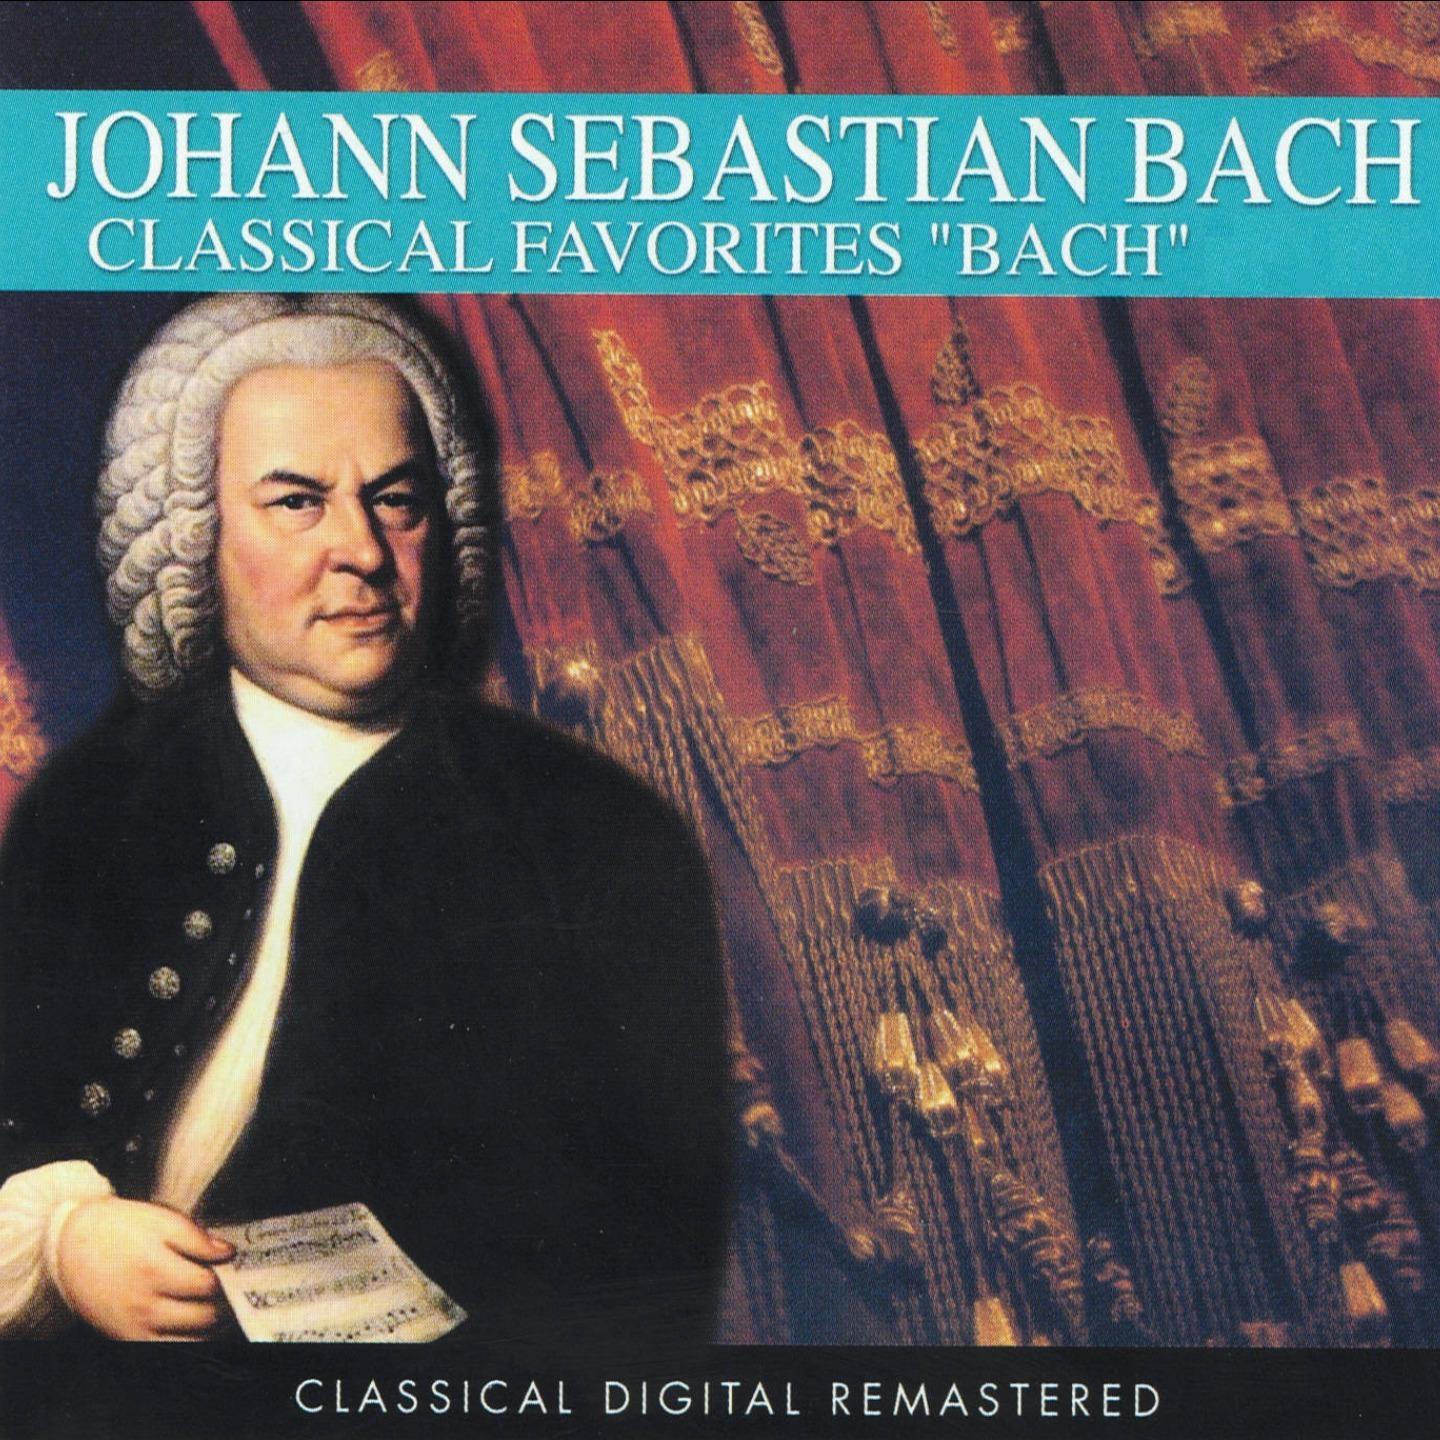 Suite for Orchestra No. 2, in B Minor, BWV 1067: Ouverture